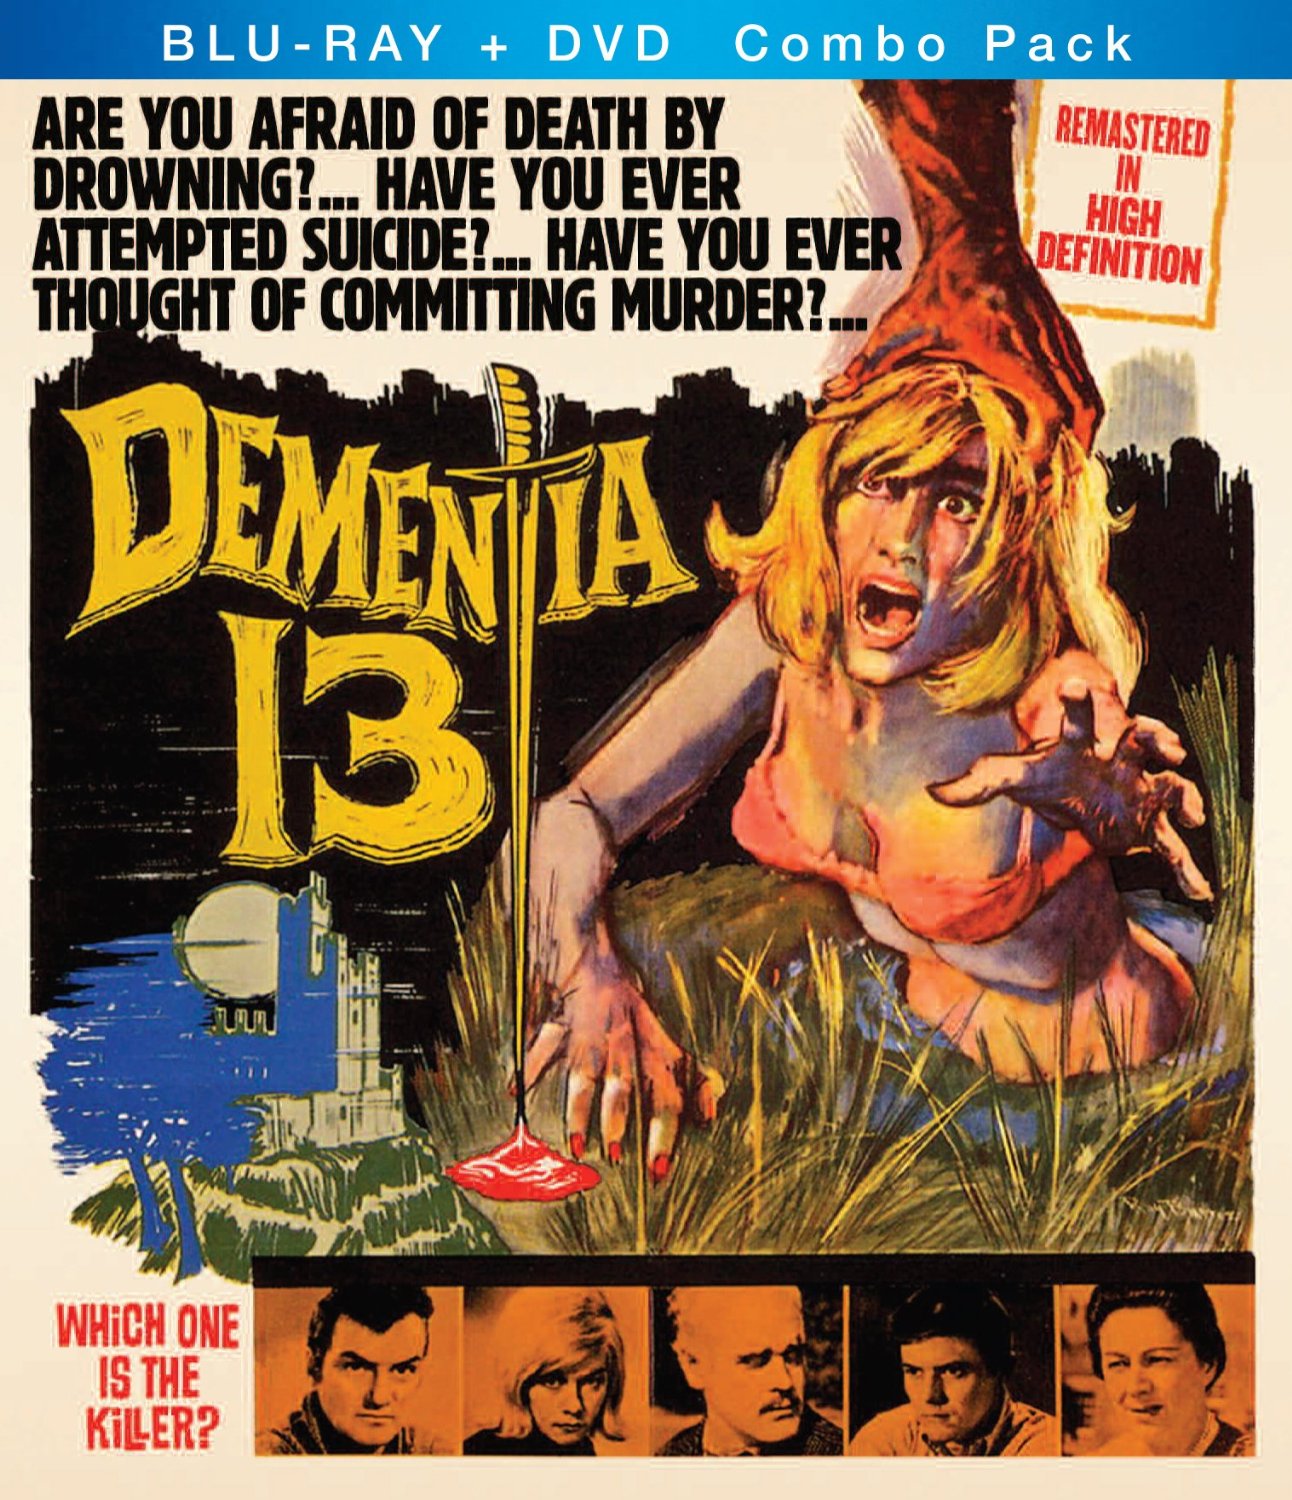 Dementia 13 (1963) starring William Campbell, Luana Anders, directed by Francis Ford Coppola